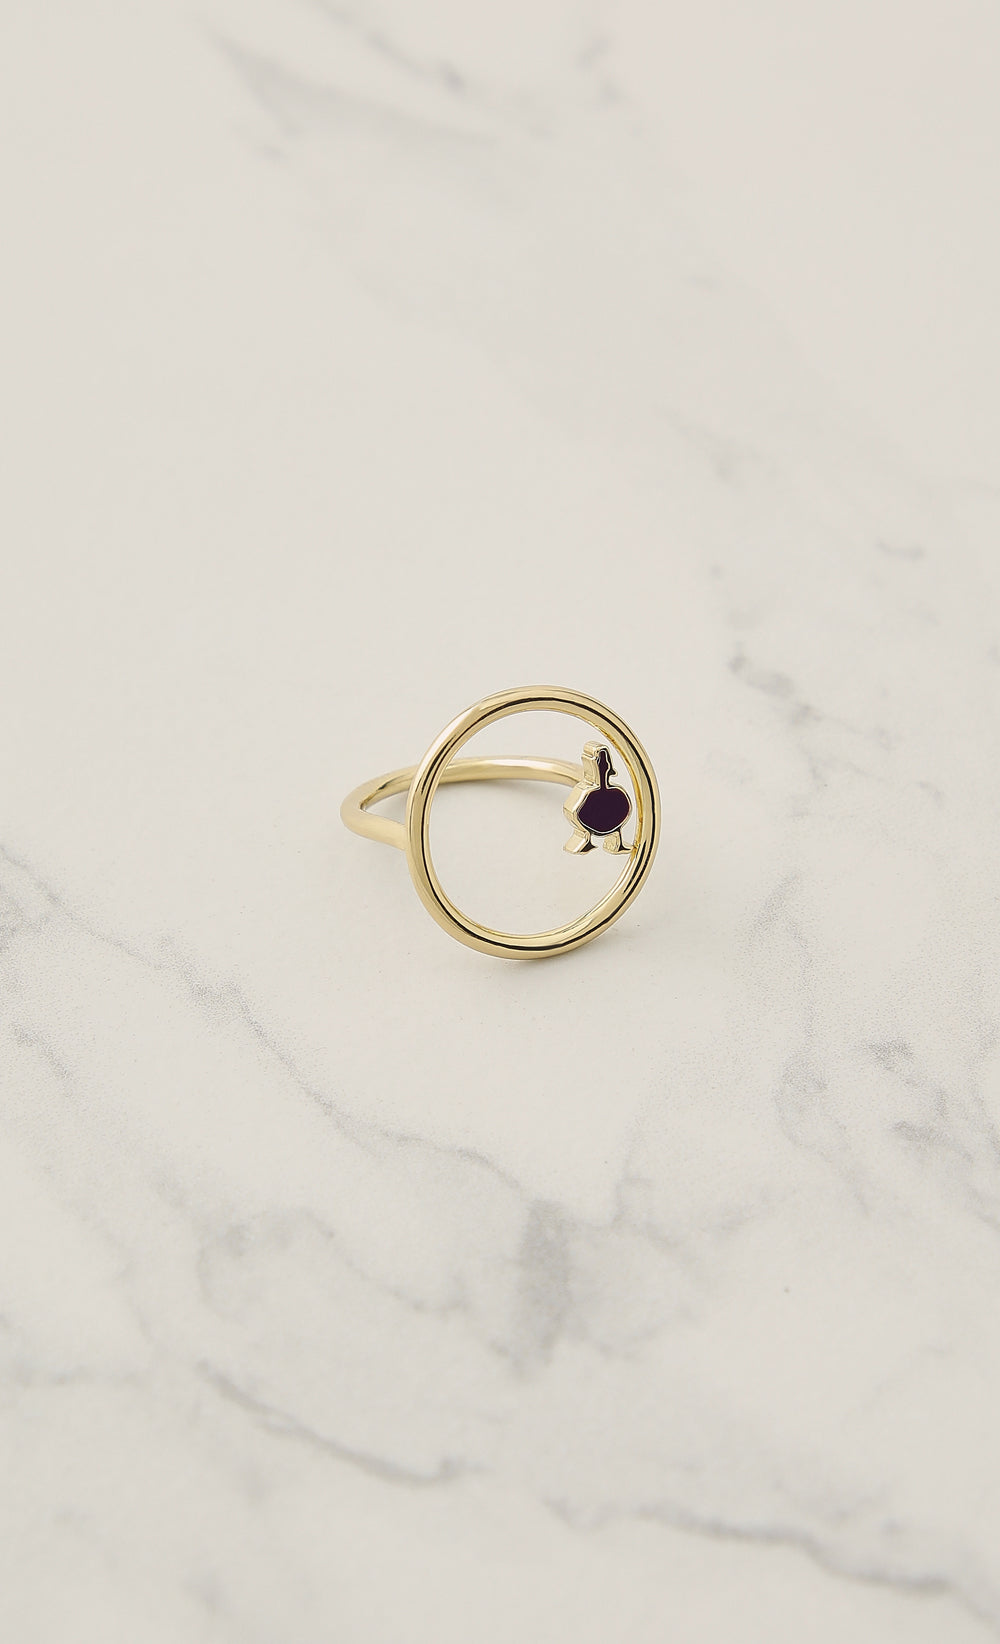 Moon Scarf Ring in Gold